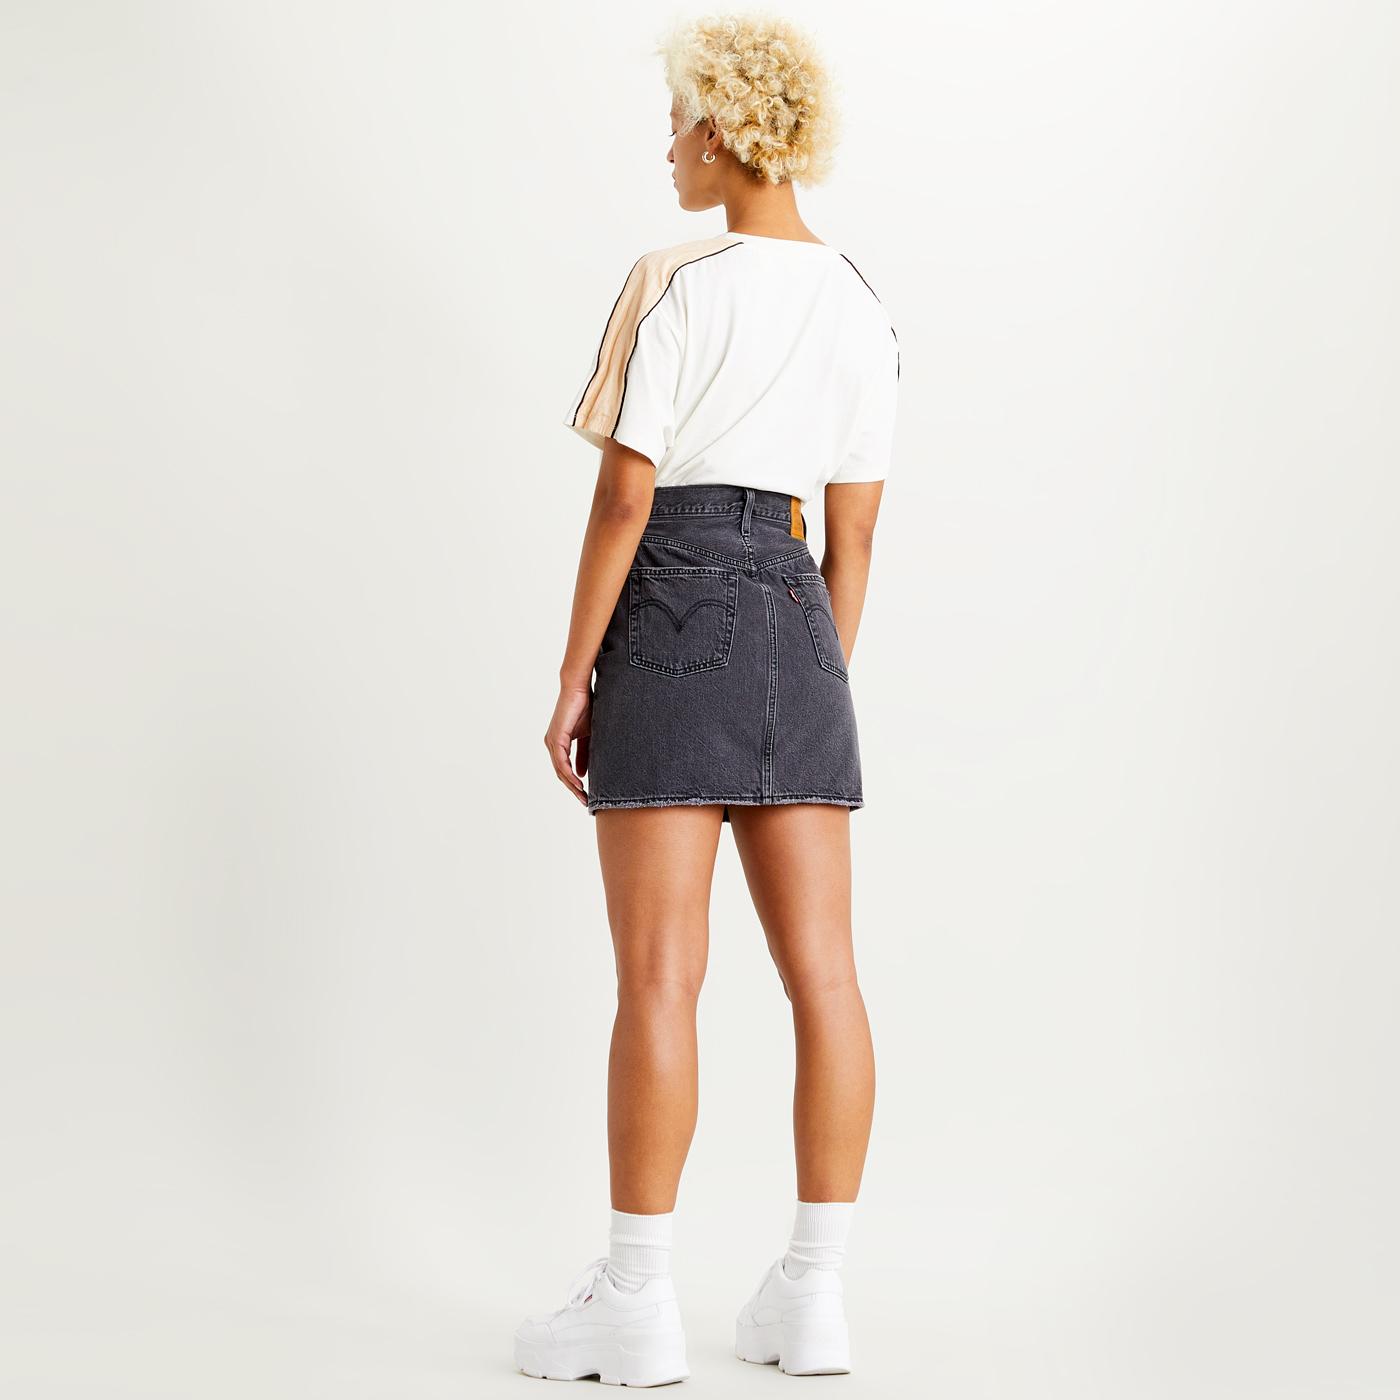 LEVI'S HR Decon Iconic Retro Button Fly Skirt in Black